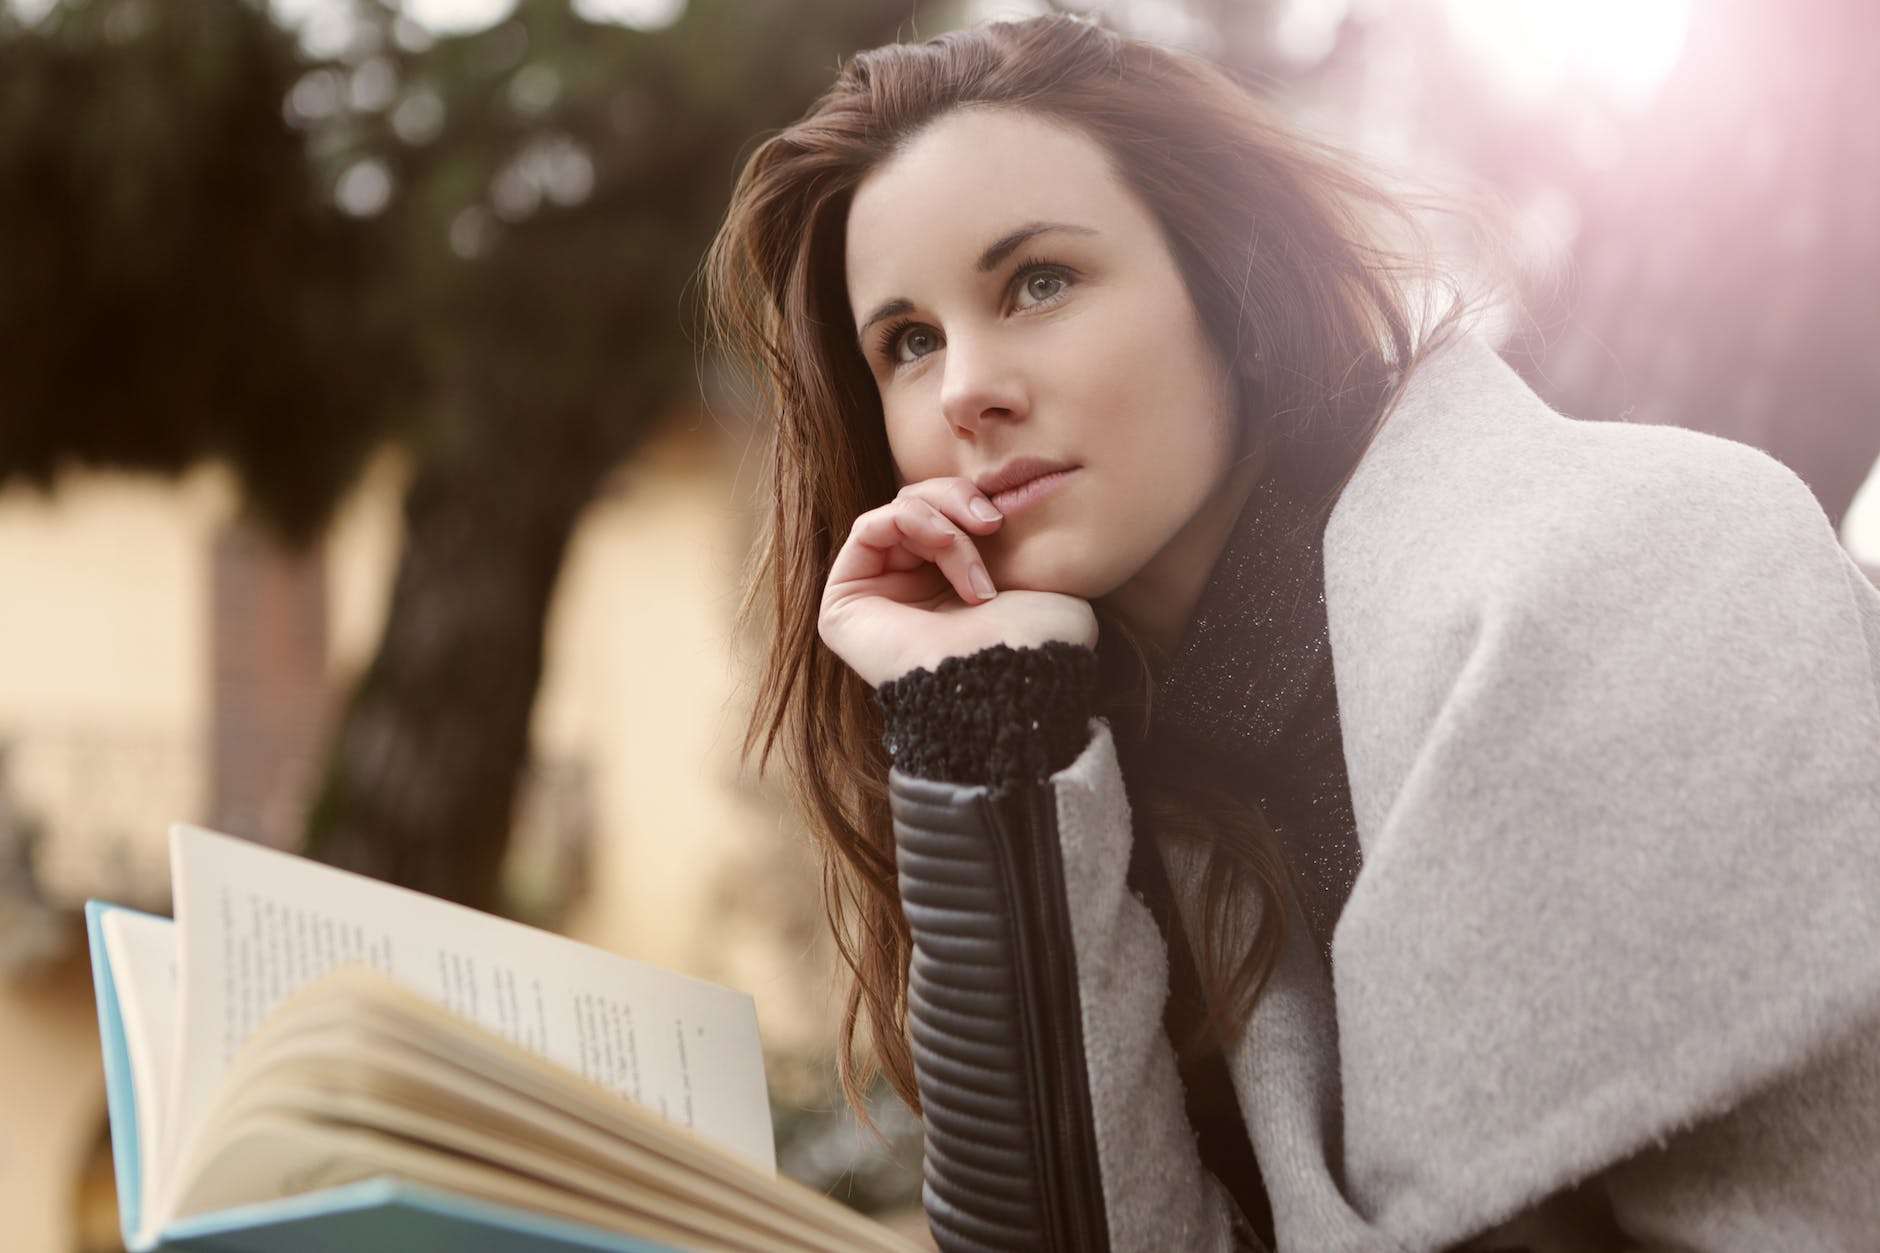 pensive woman in gray coat holding book Homeschool Mama's Thought Care Practices